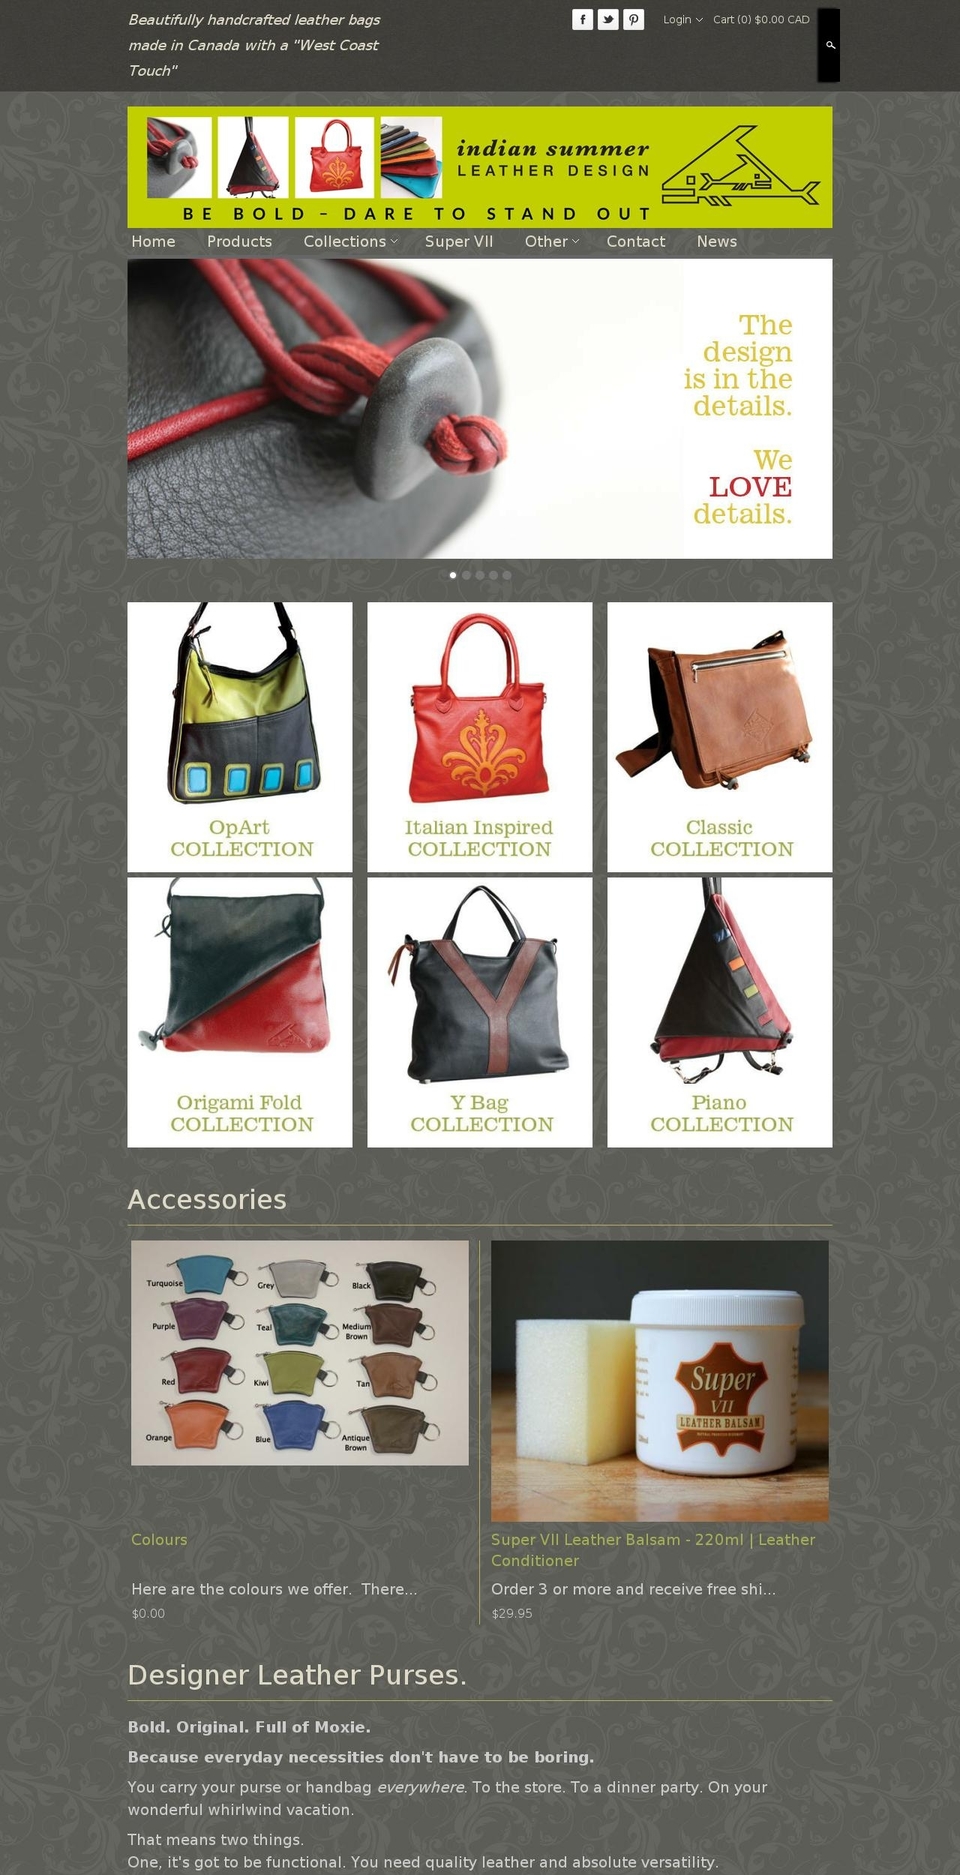 Clean Shopify theme site example indiansummerleather.com